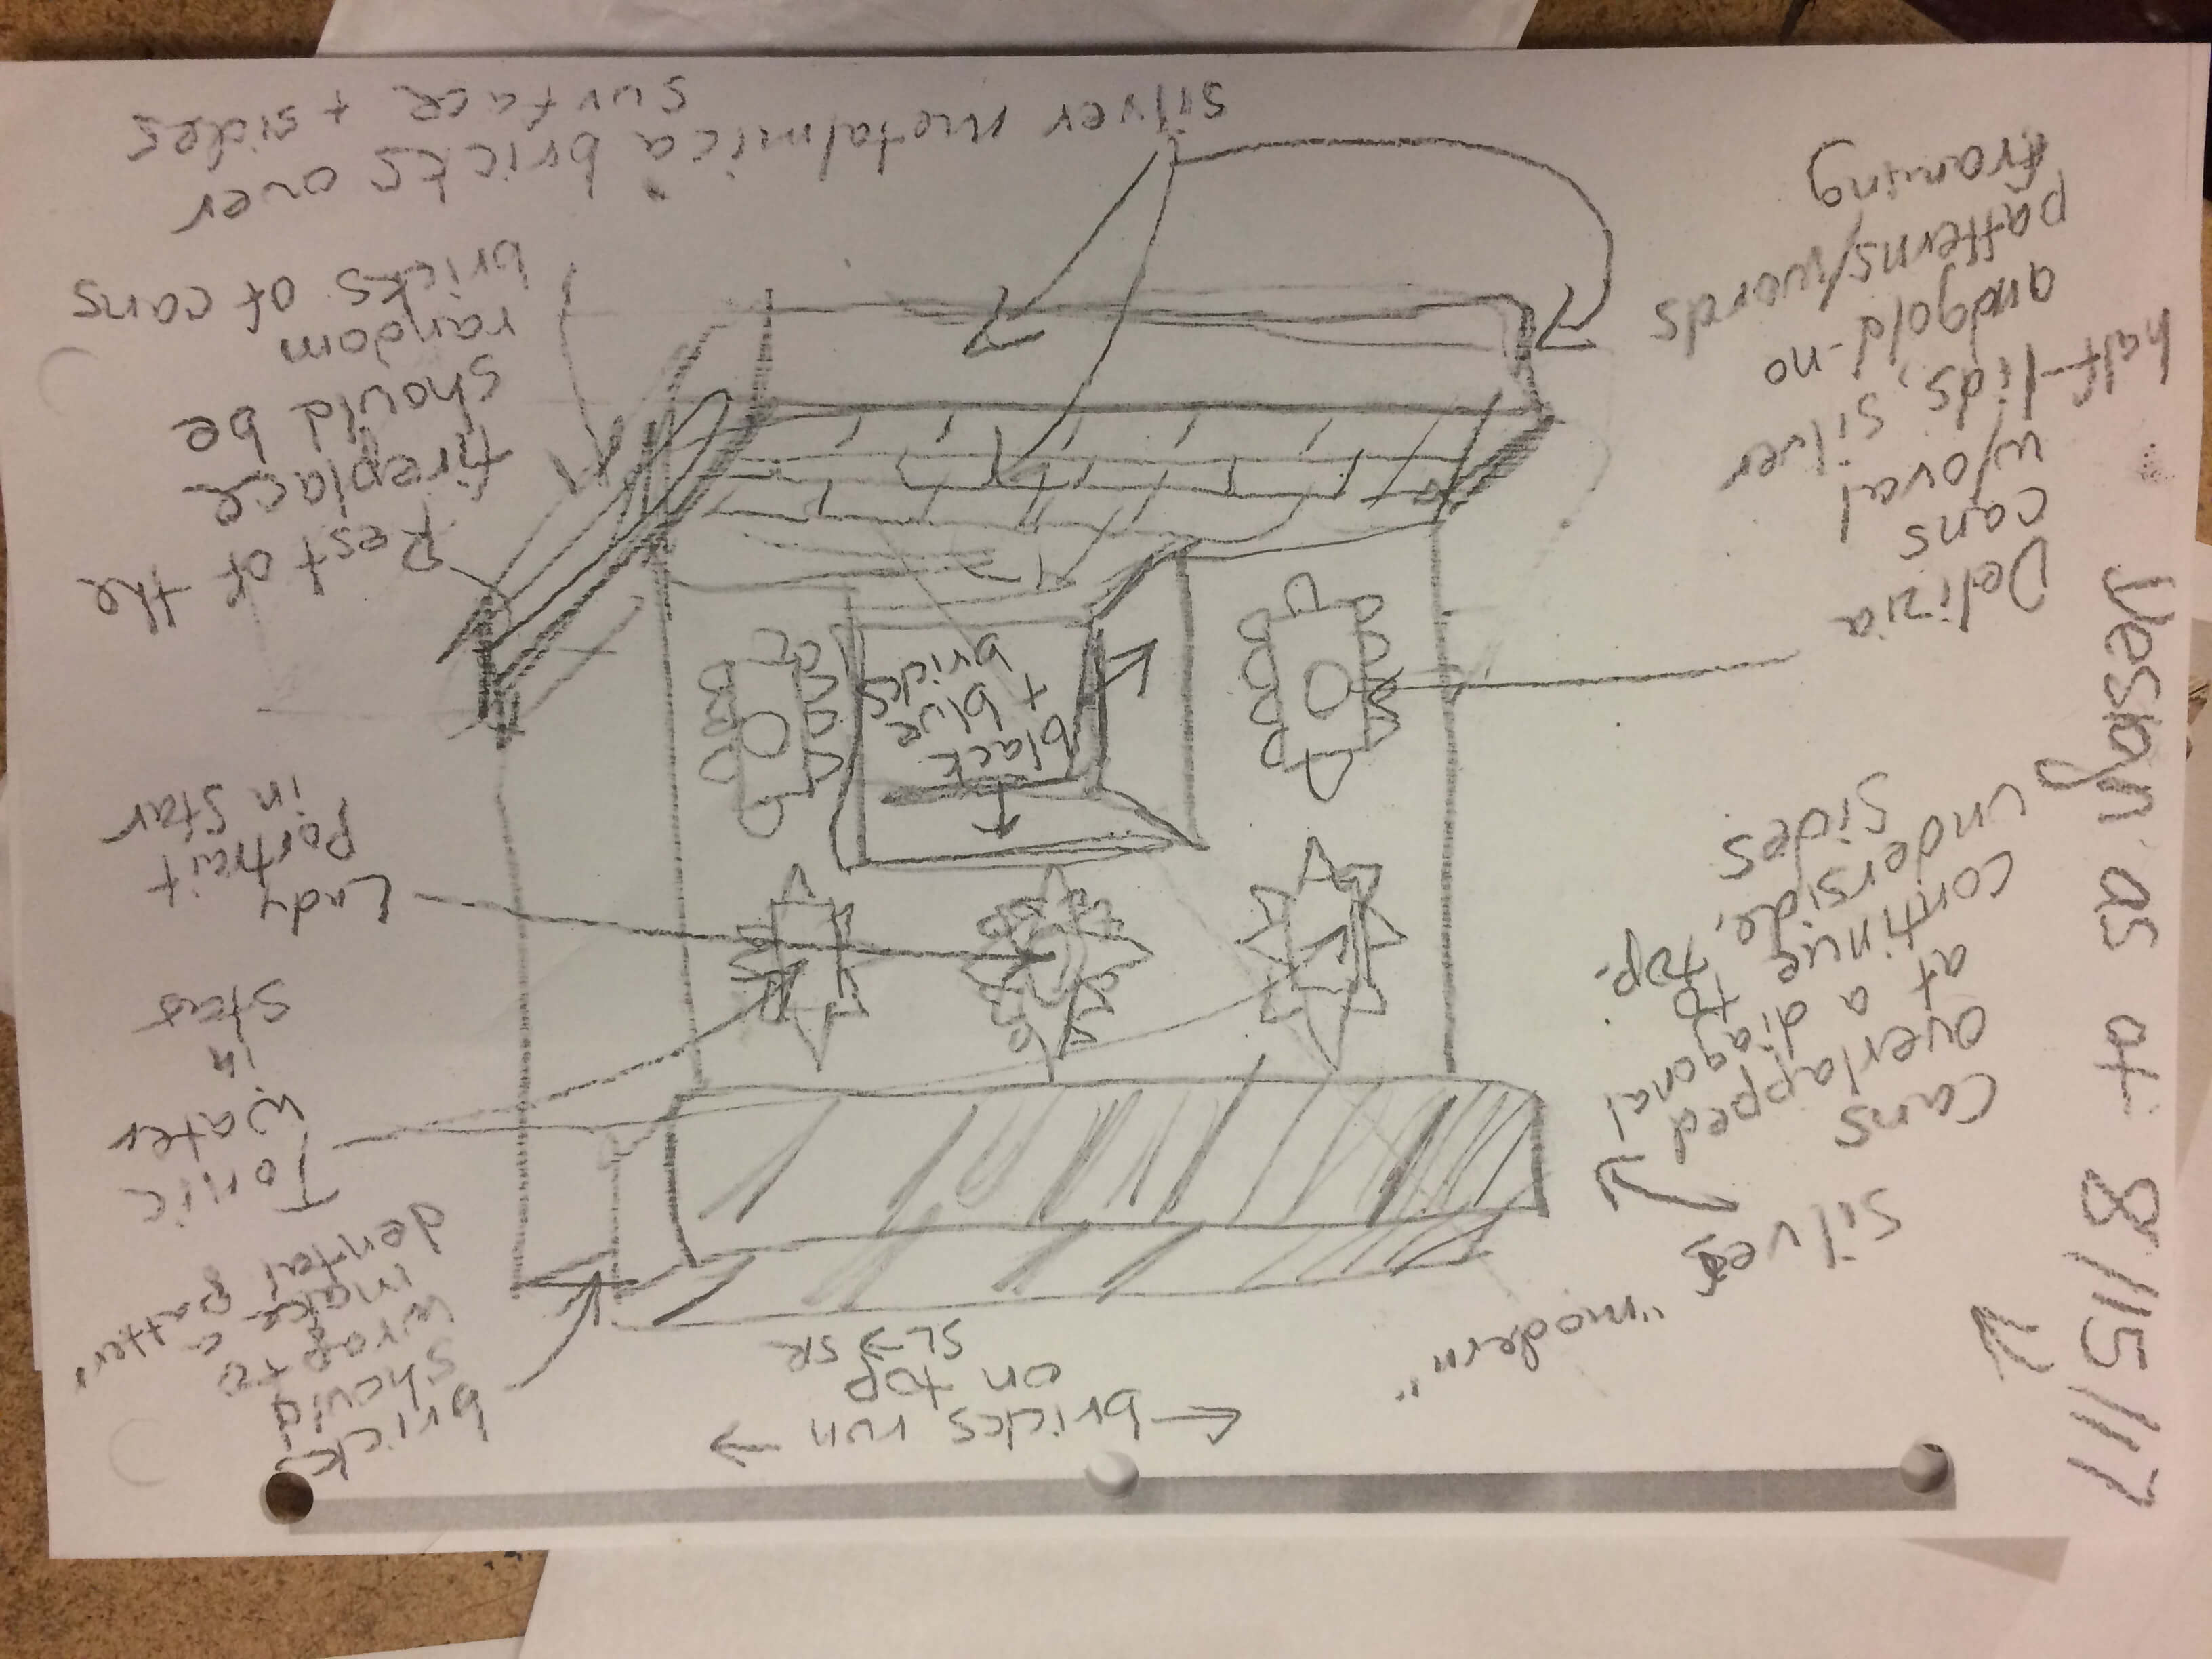 Sarah’s sketches for the fireplace, building off discussions with designer David Gropman.